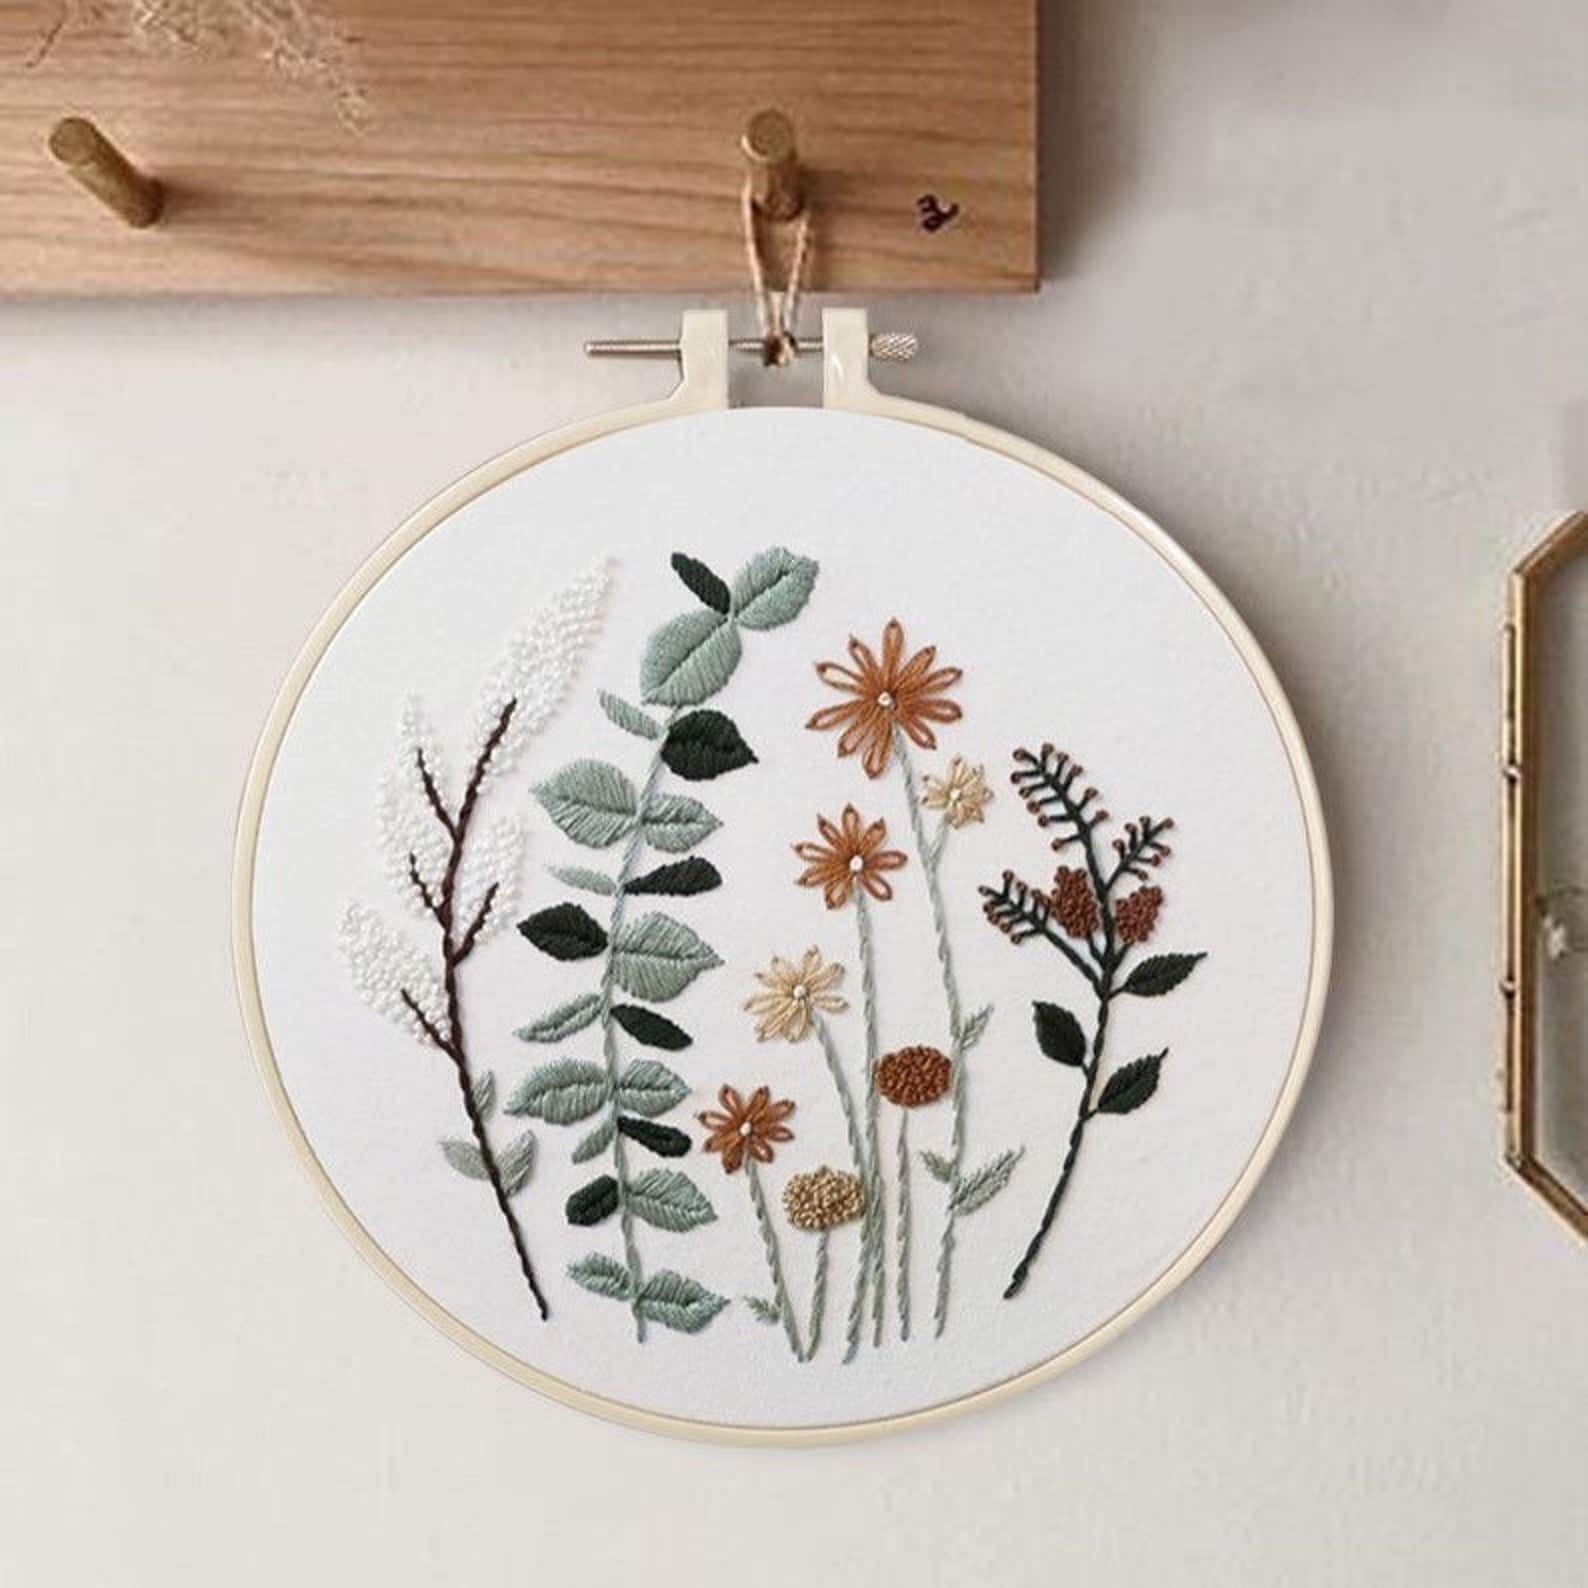 Beginner Embroidery Kit by The Cherry Blossom